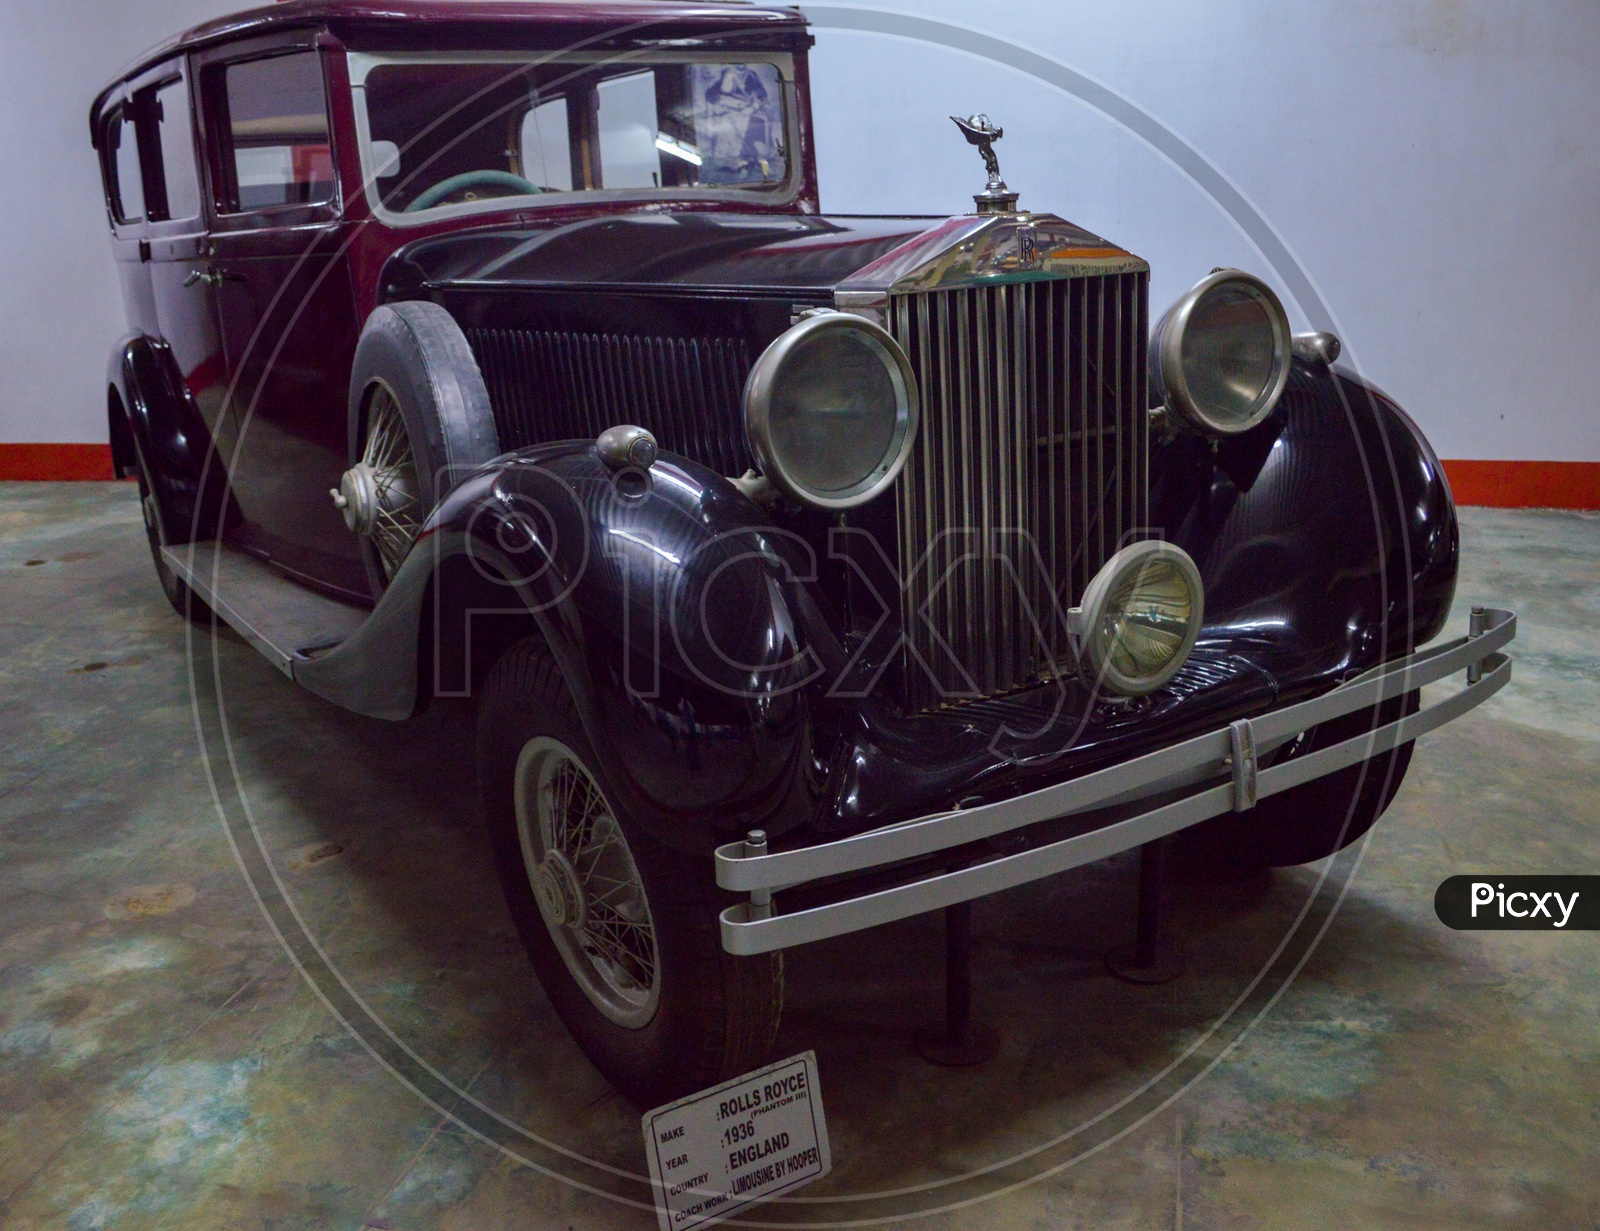 Rolls Royce Phantom III Limousine Luxury Vintage car made by Hooper in the year 1936 from England